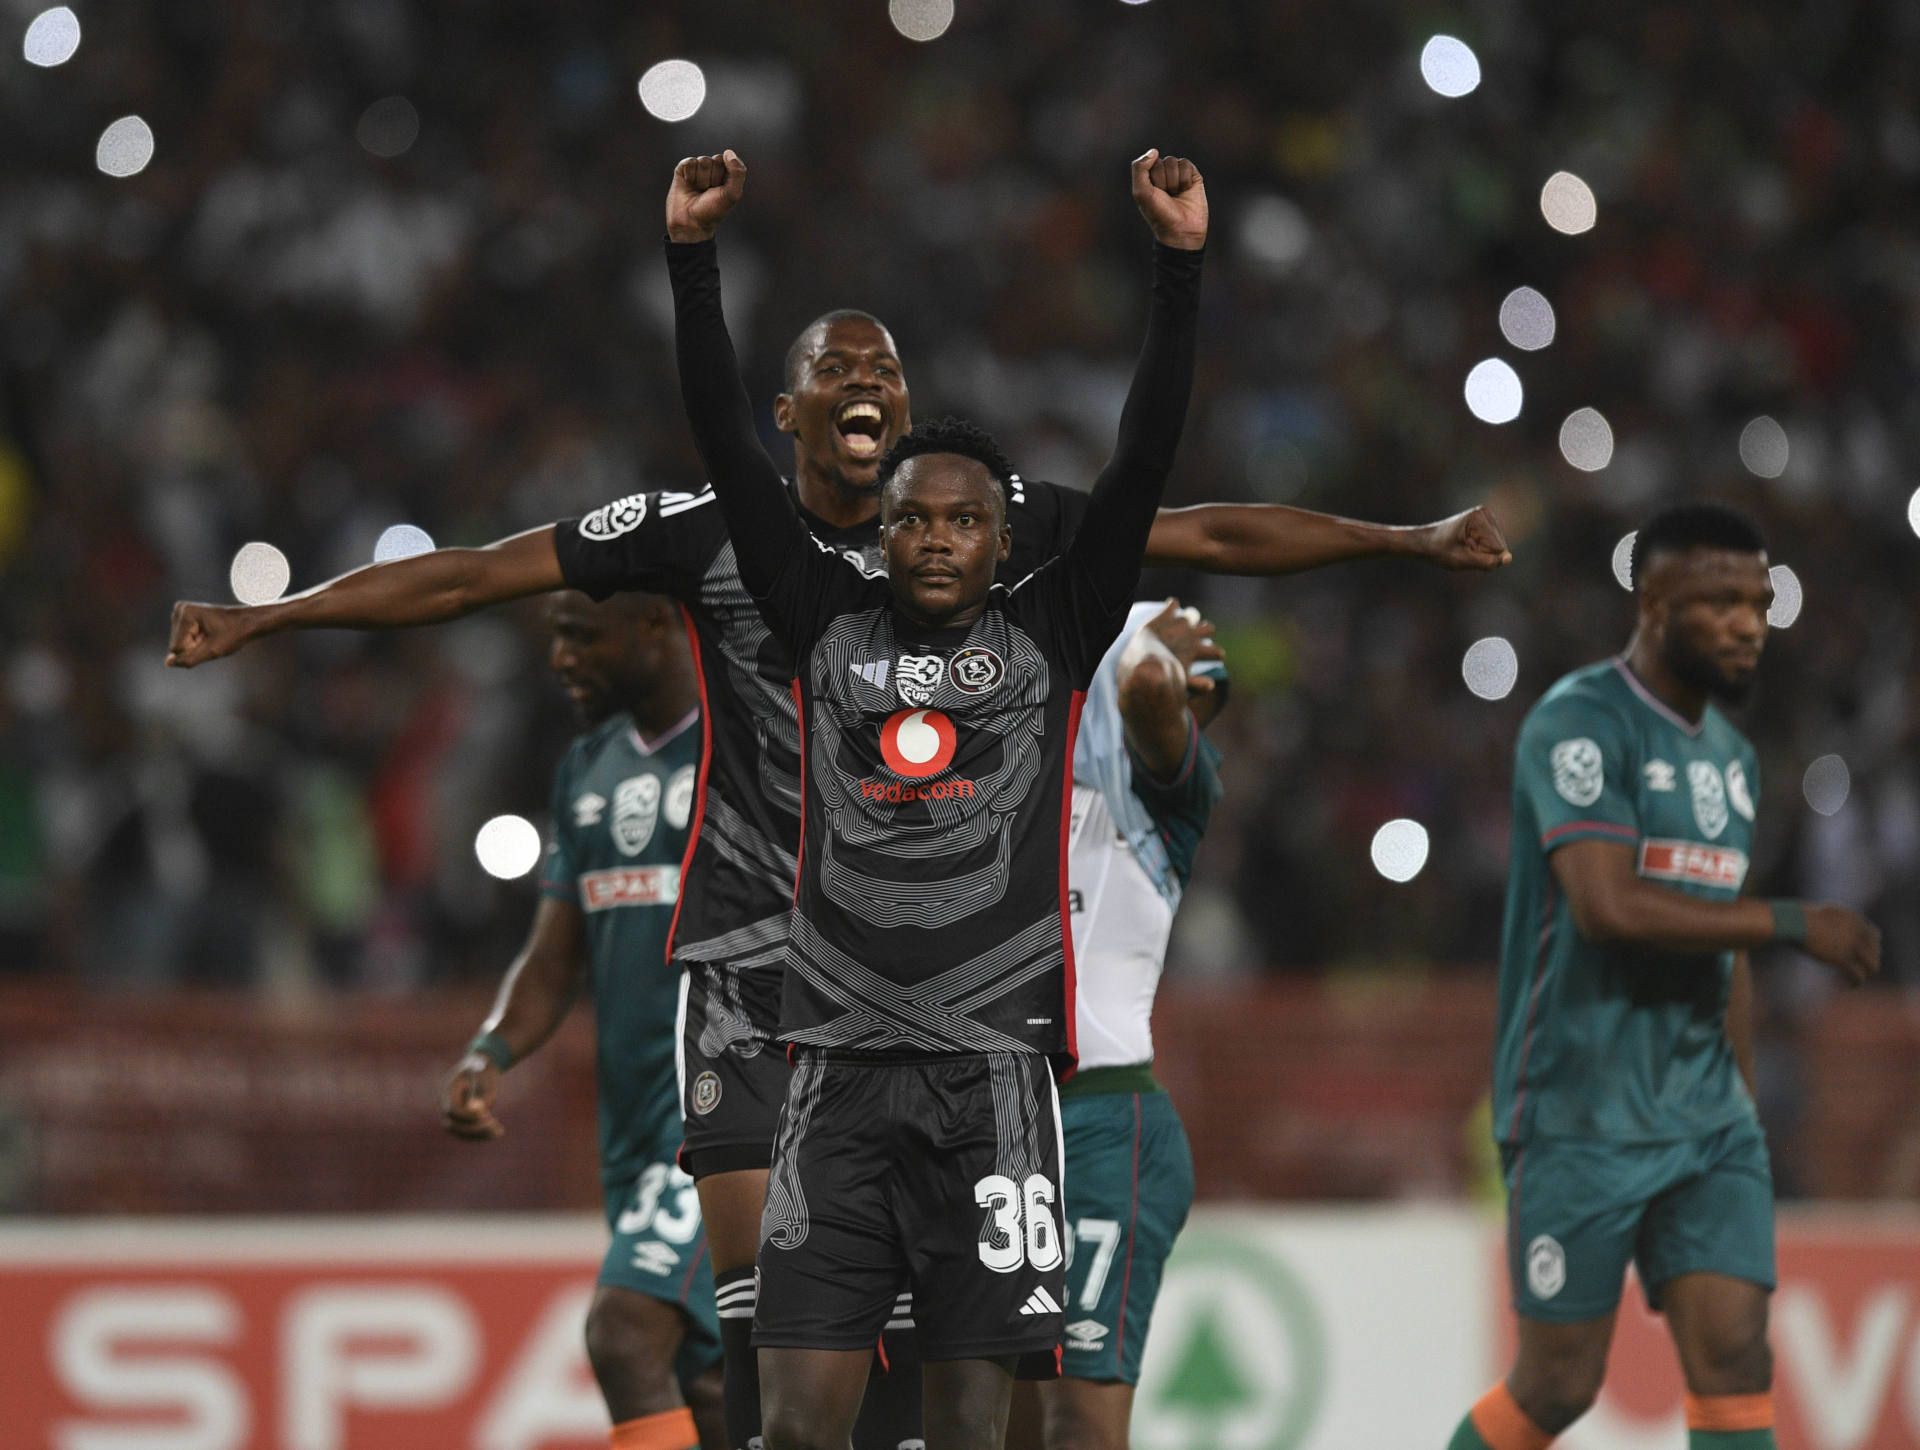 orlando pirates face player exodus with 10 contracts expiring